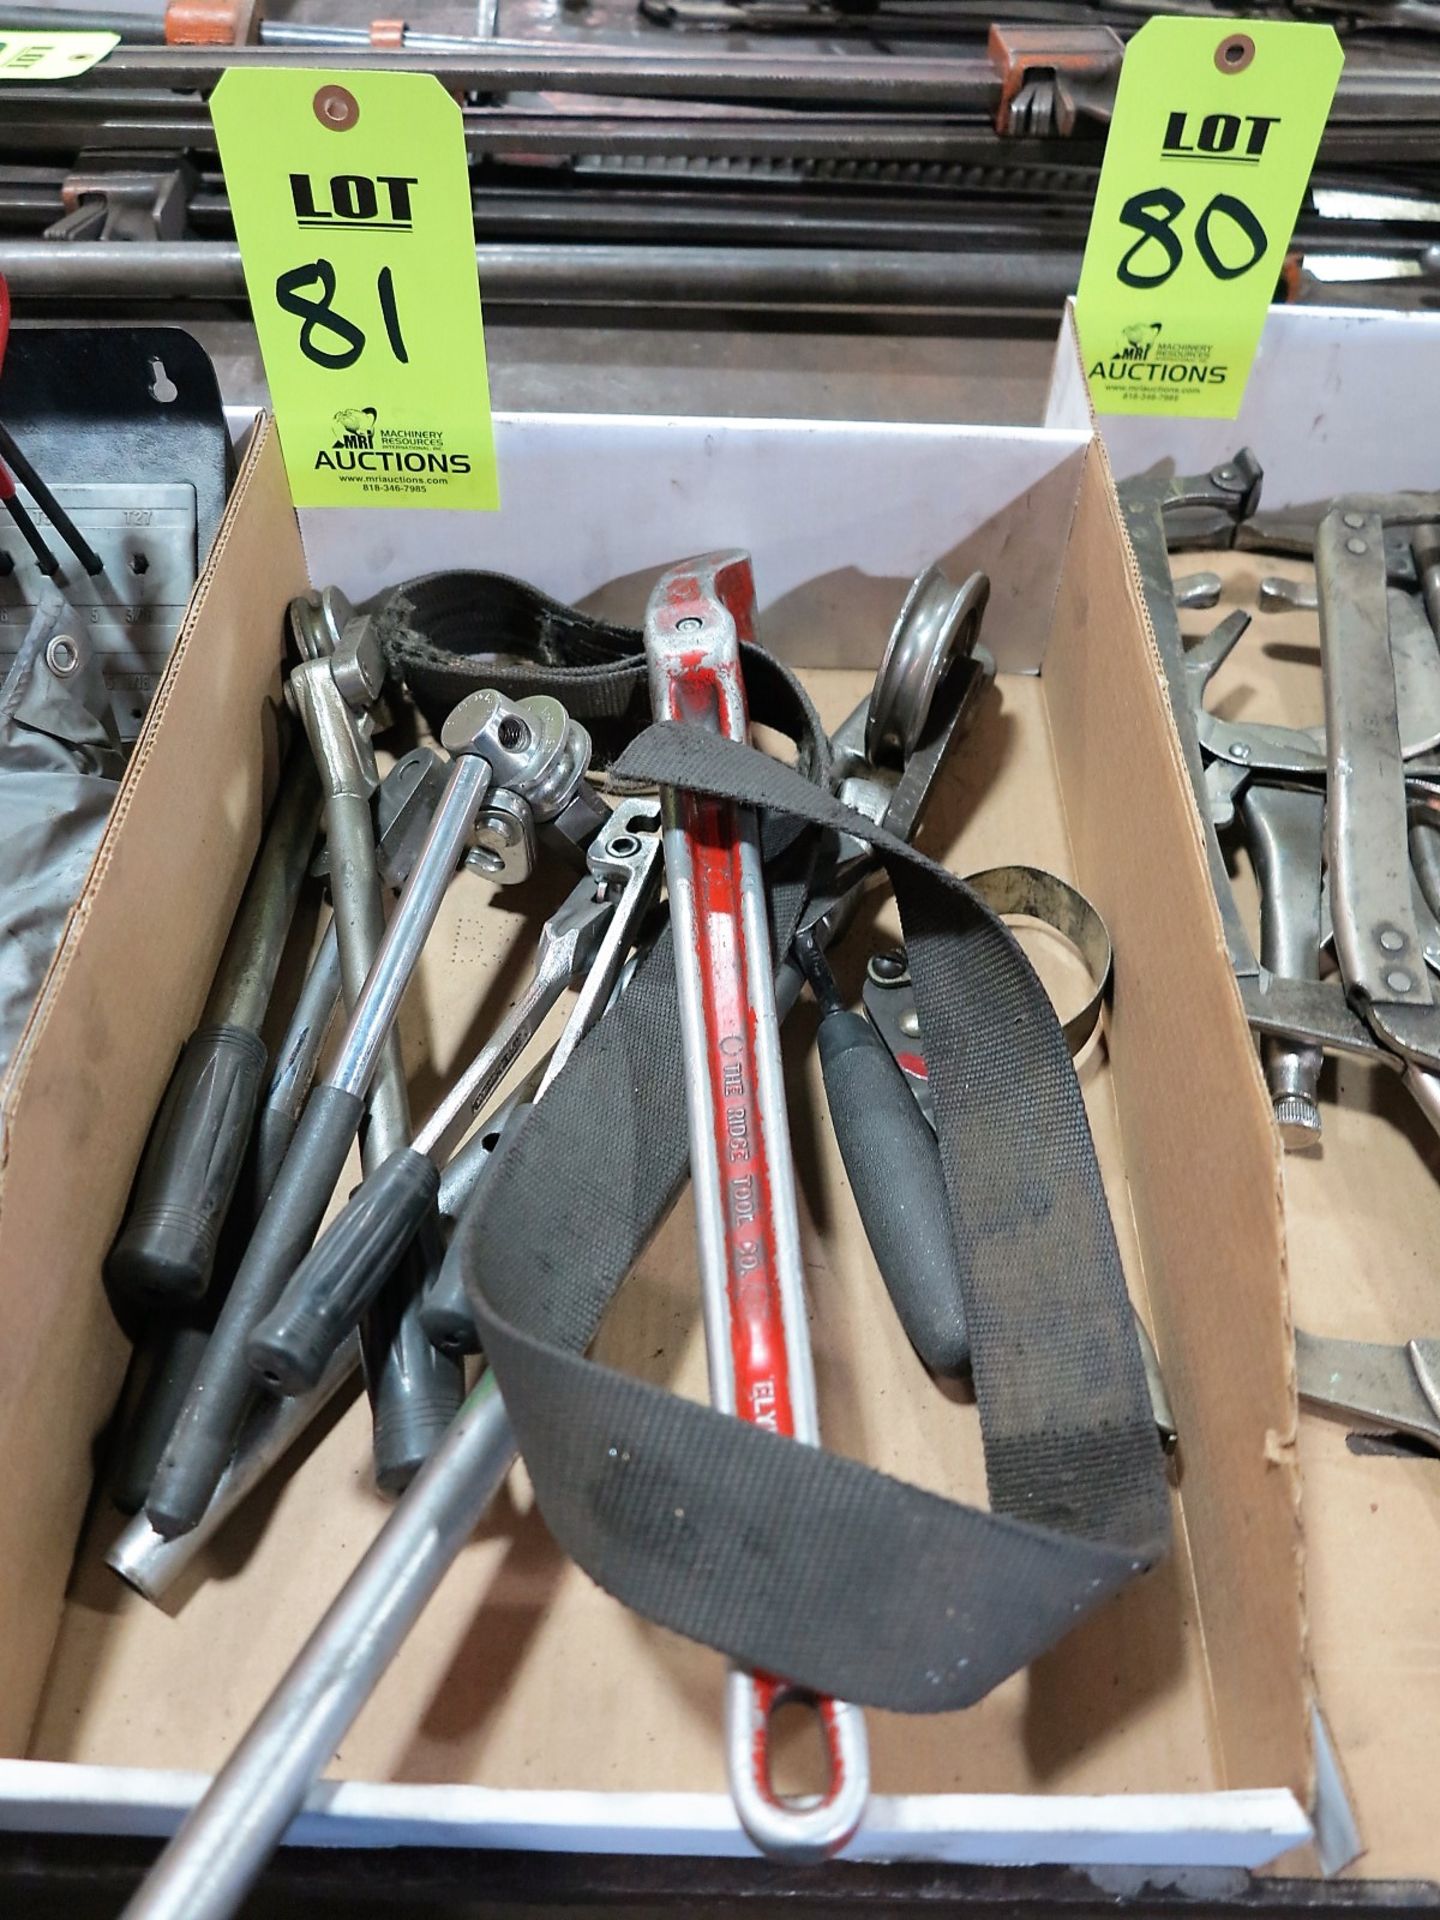 LOT OF TUBING BENDERS AND STRAP WRENCHES